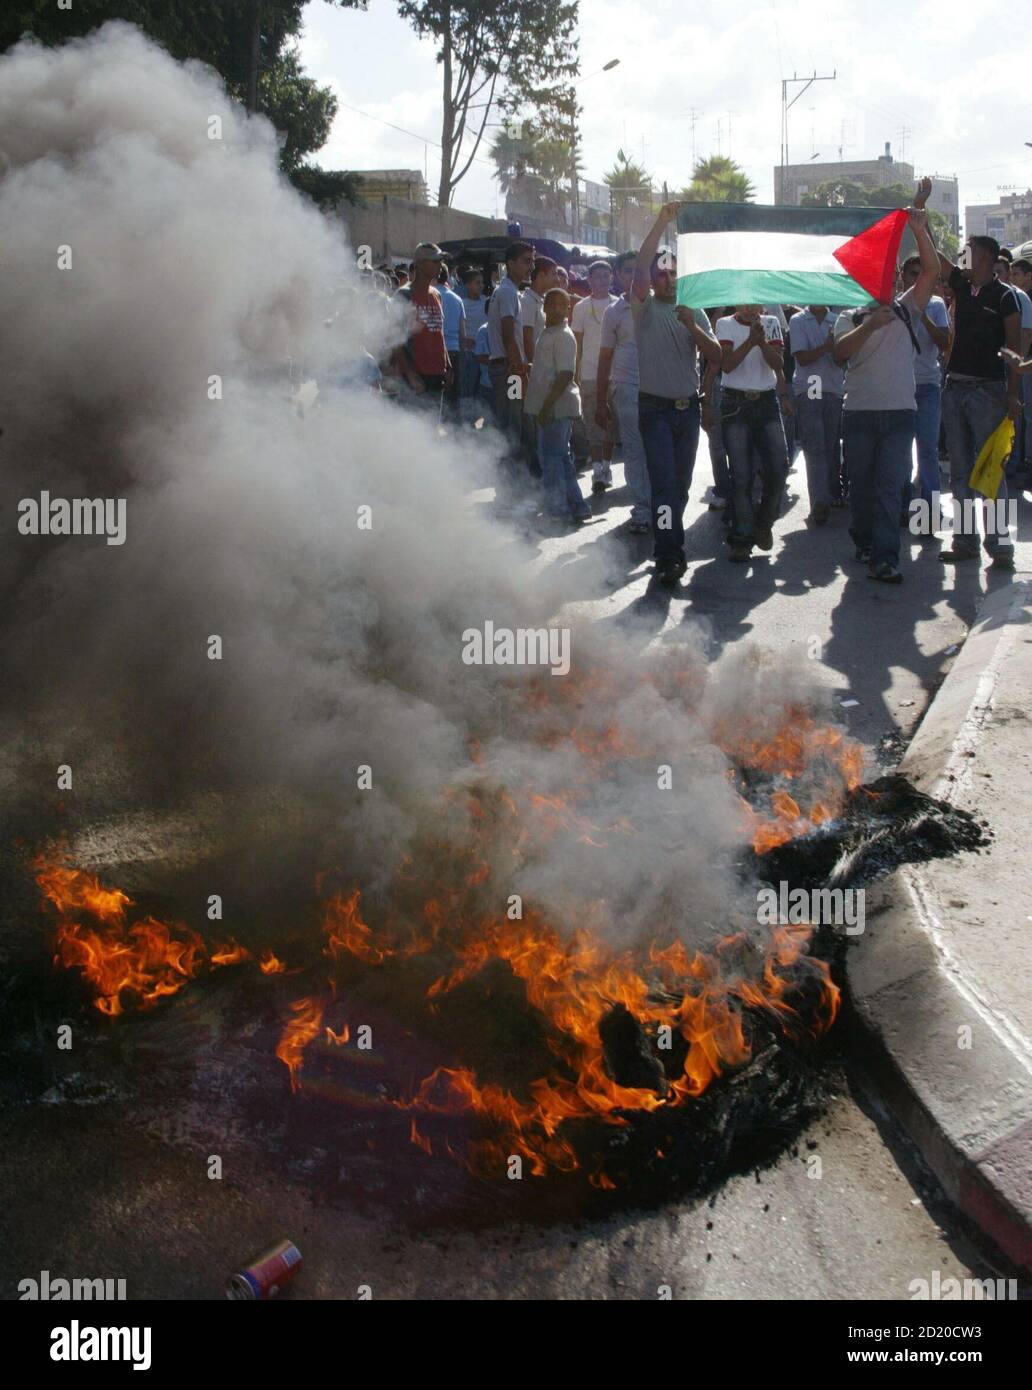 Palestinian students walk past burning tyres during a protest after government workers, including teachers, started an open-ended strike in the town of Tulkarm September 2, 2006. Tens of thousands of Palestinian government employees went on strike in the West Bank and Gaza on Saturday in protest against unpaid salaries and the perceived failings of the Hamas-led government. REUTERS/Mustafa Abu Dayeh  (WEST BANK) Stock Photo